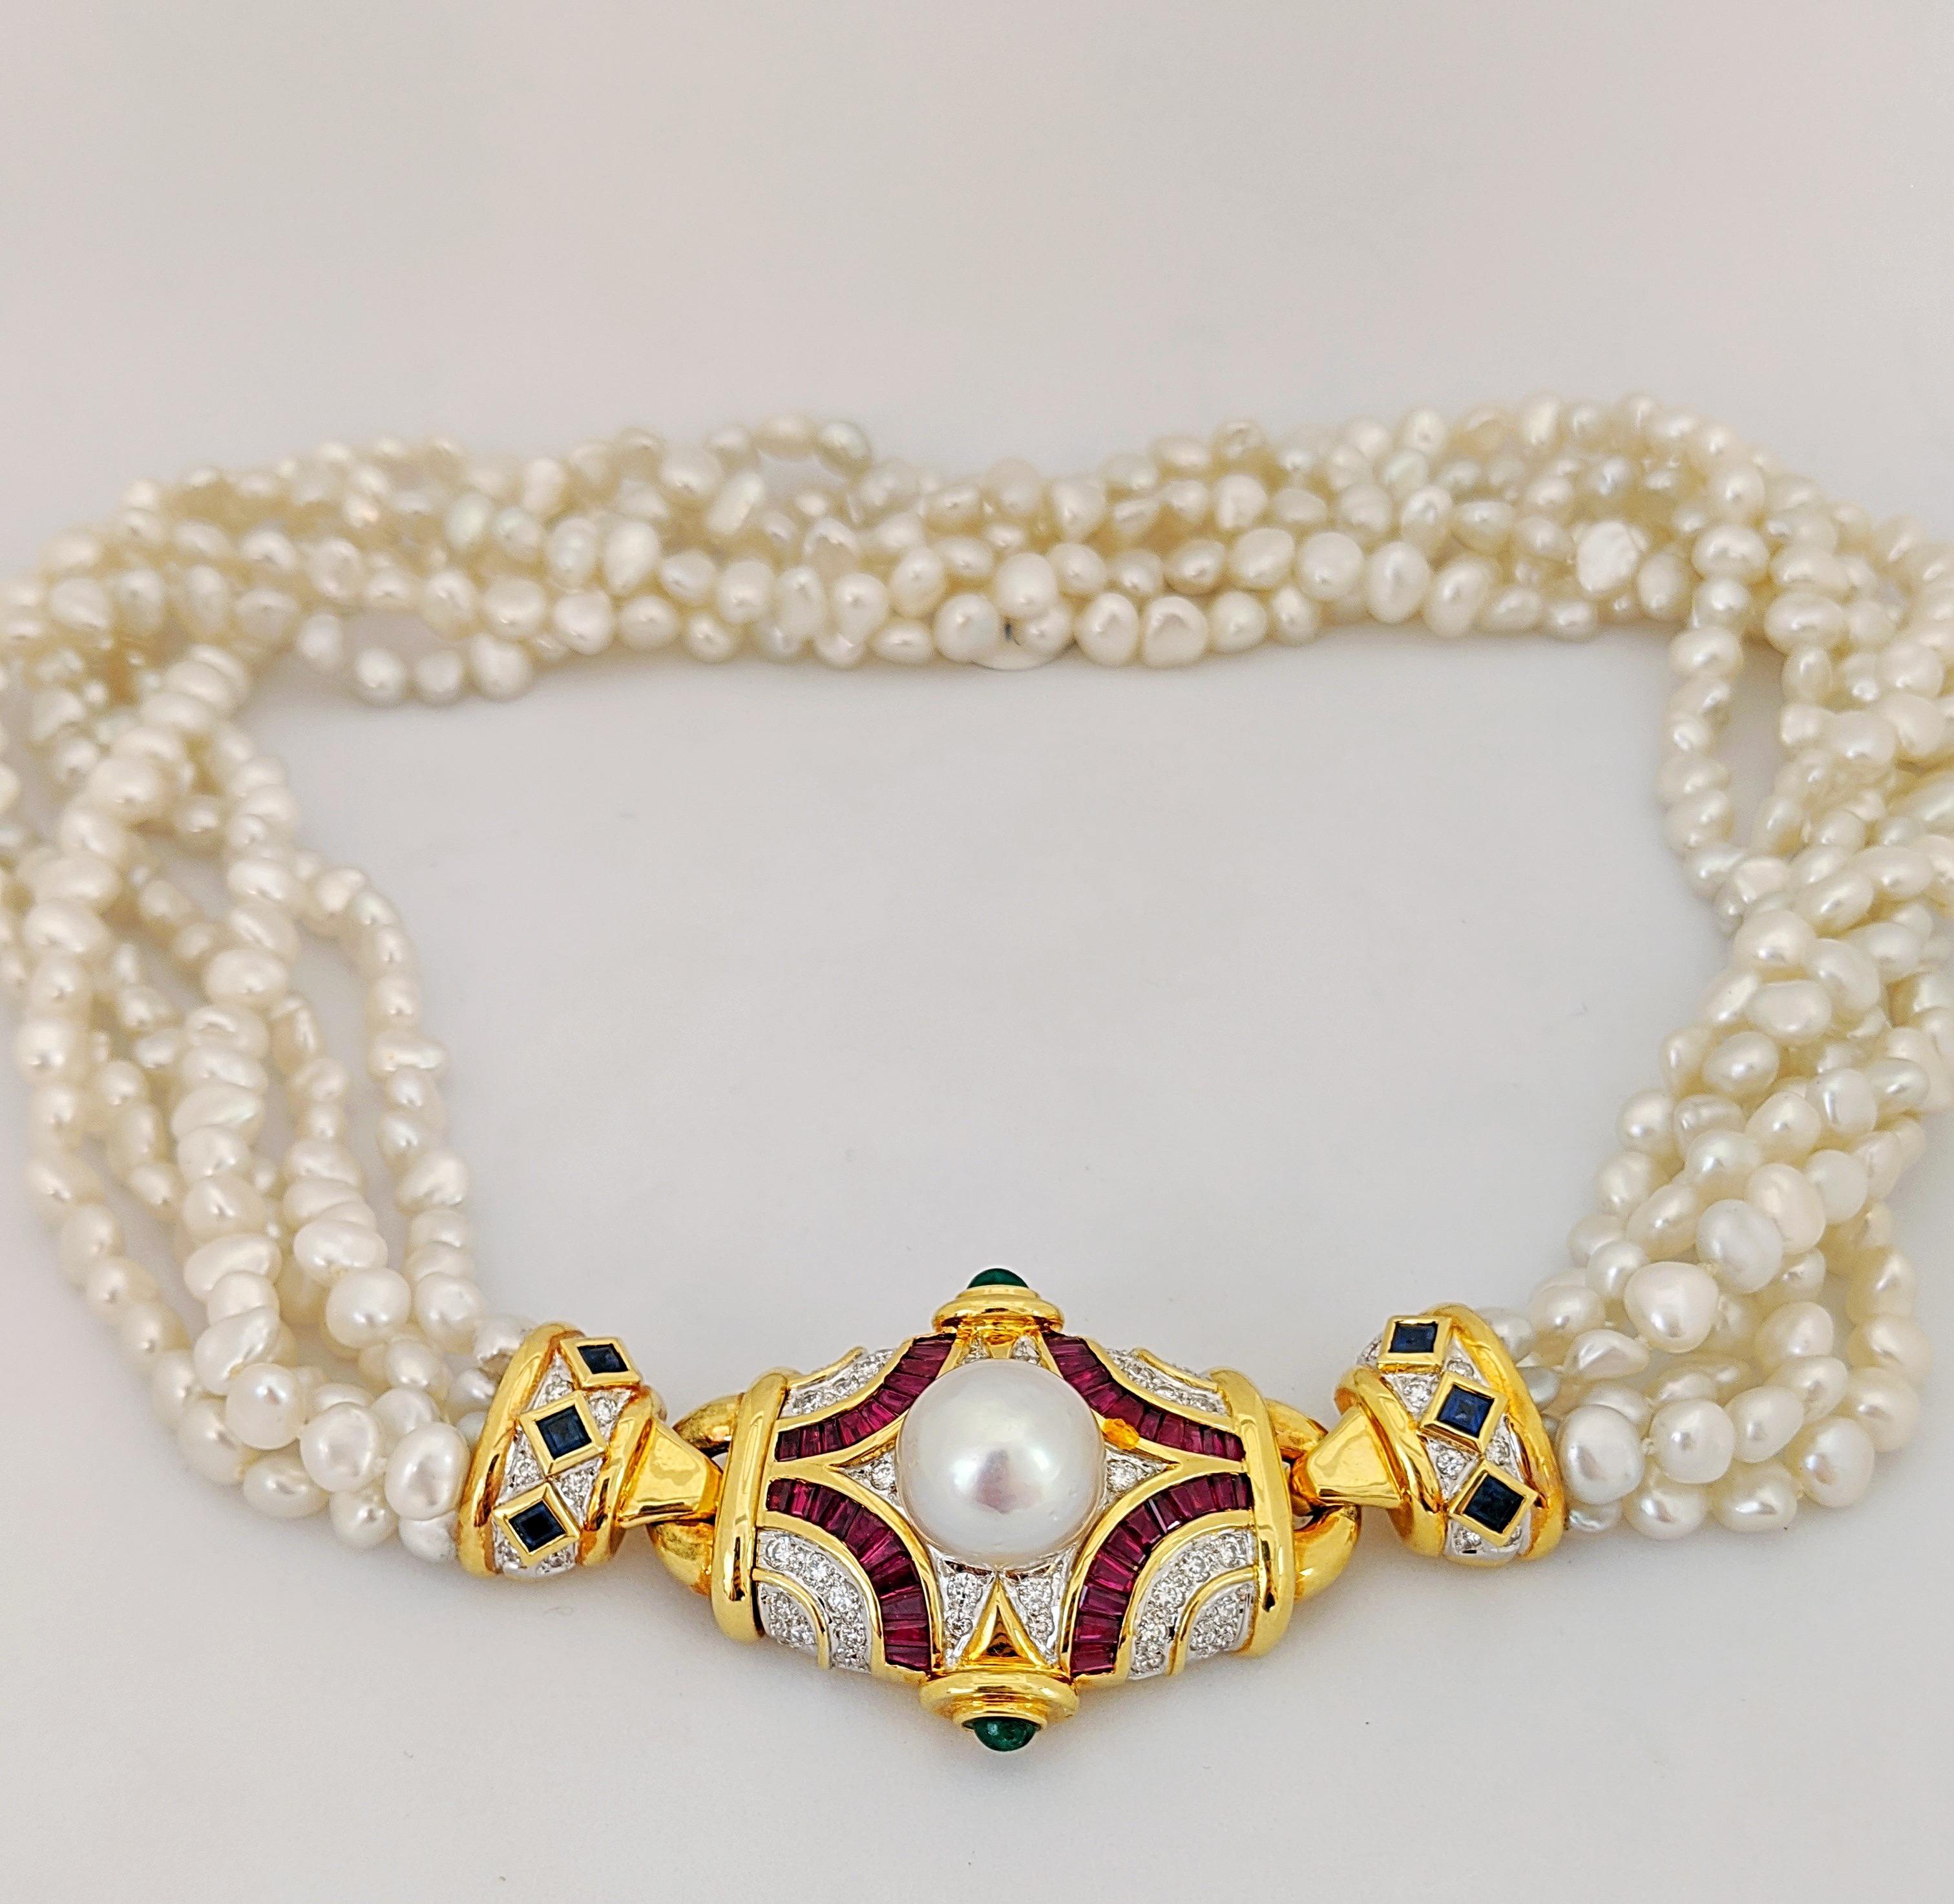 This exquisite necklace feature 18 karat yellow gold clasp set with round brilliant cut Diamonds and baguette cut Rubies. The piece is further accented with cabachon Emeralds and a 12.5 mm South Sea Pearl. The two end pieces are set with Diamonds